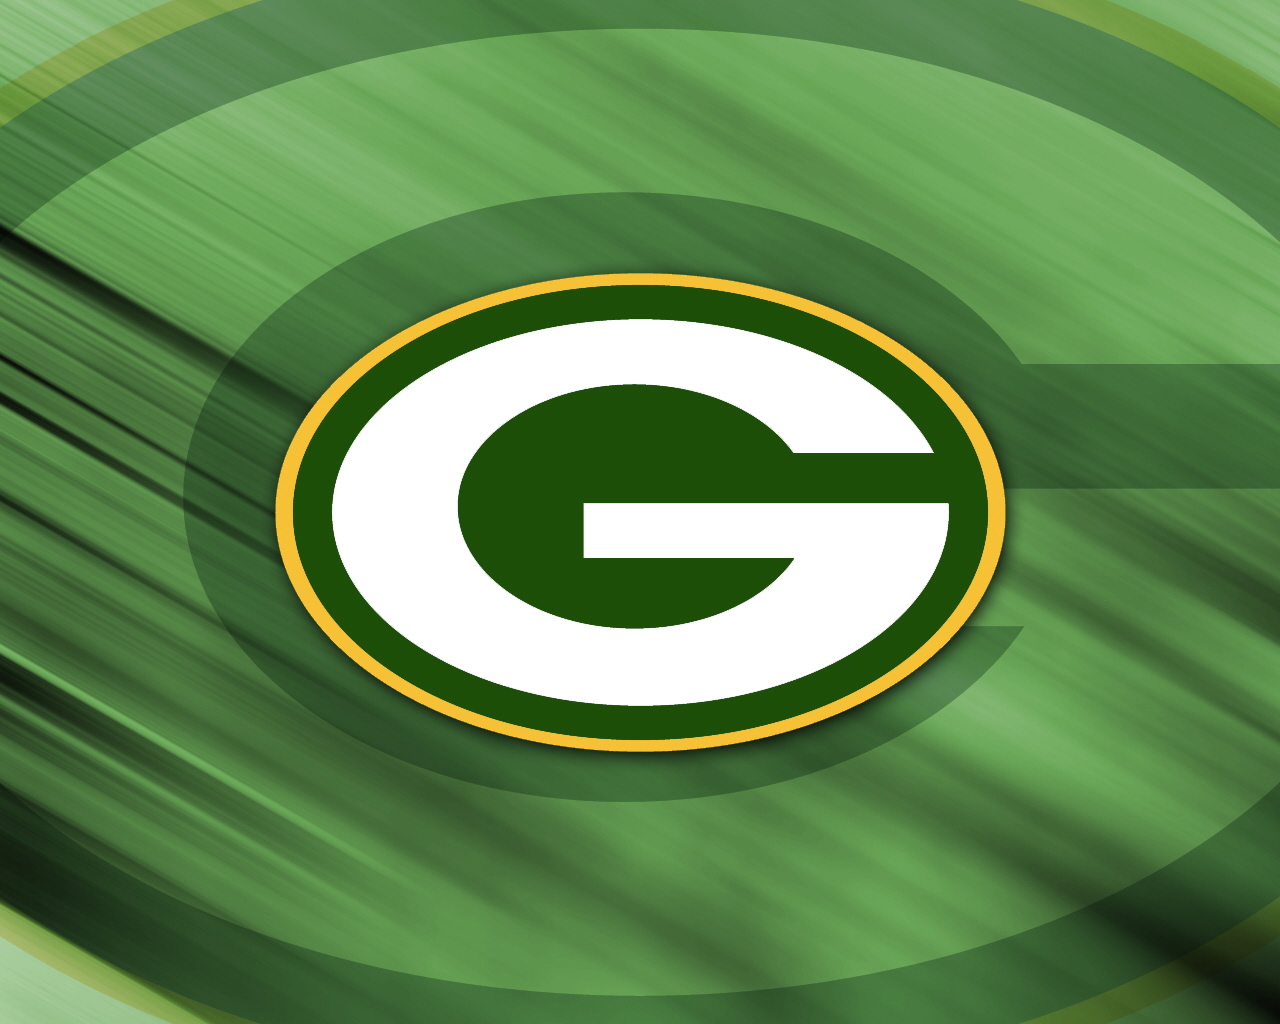 sports, green bay packers